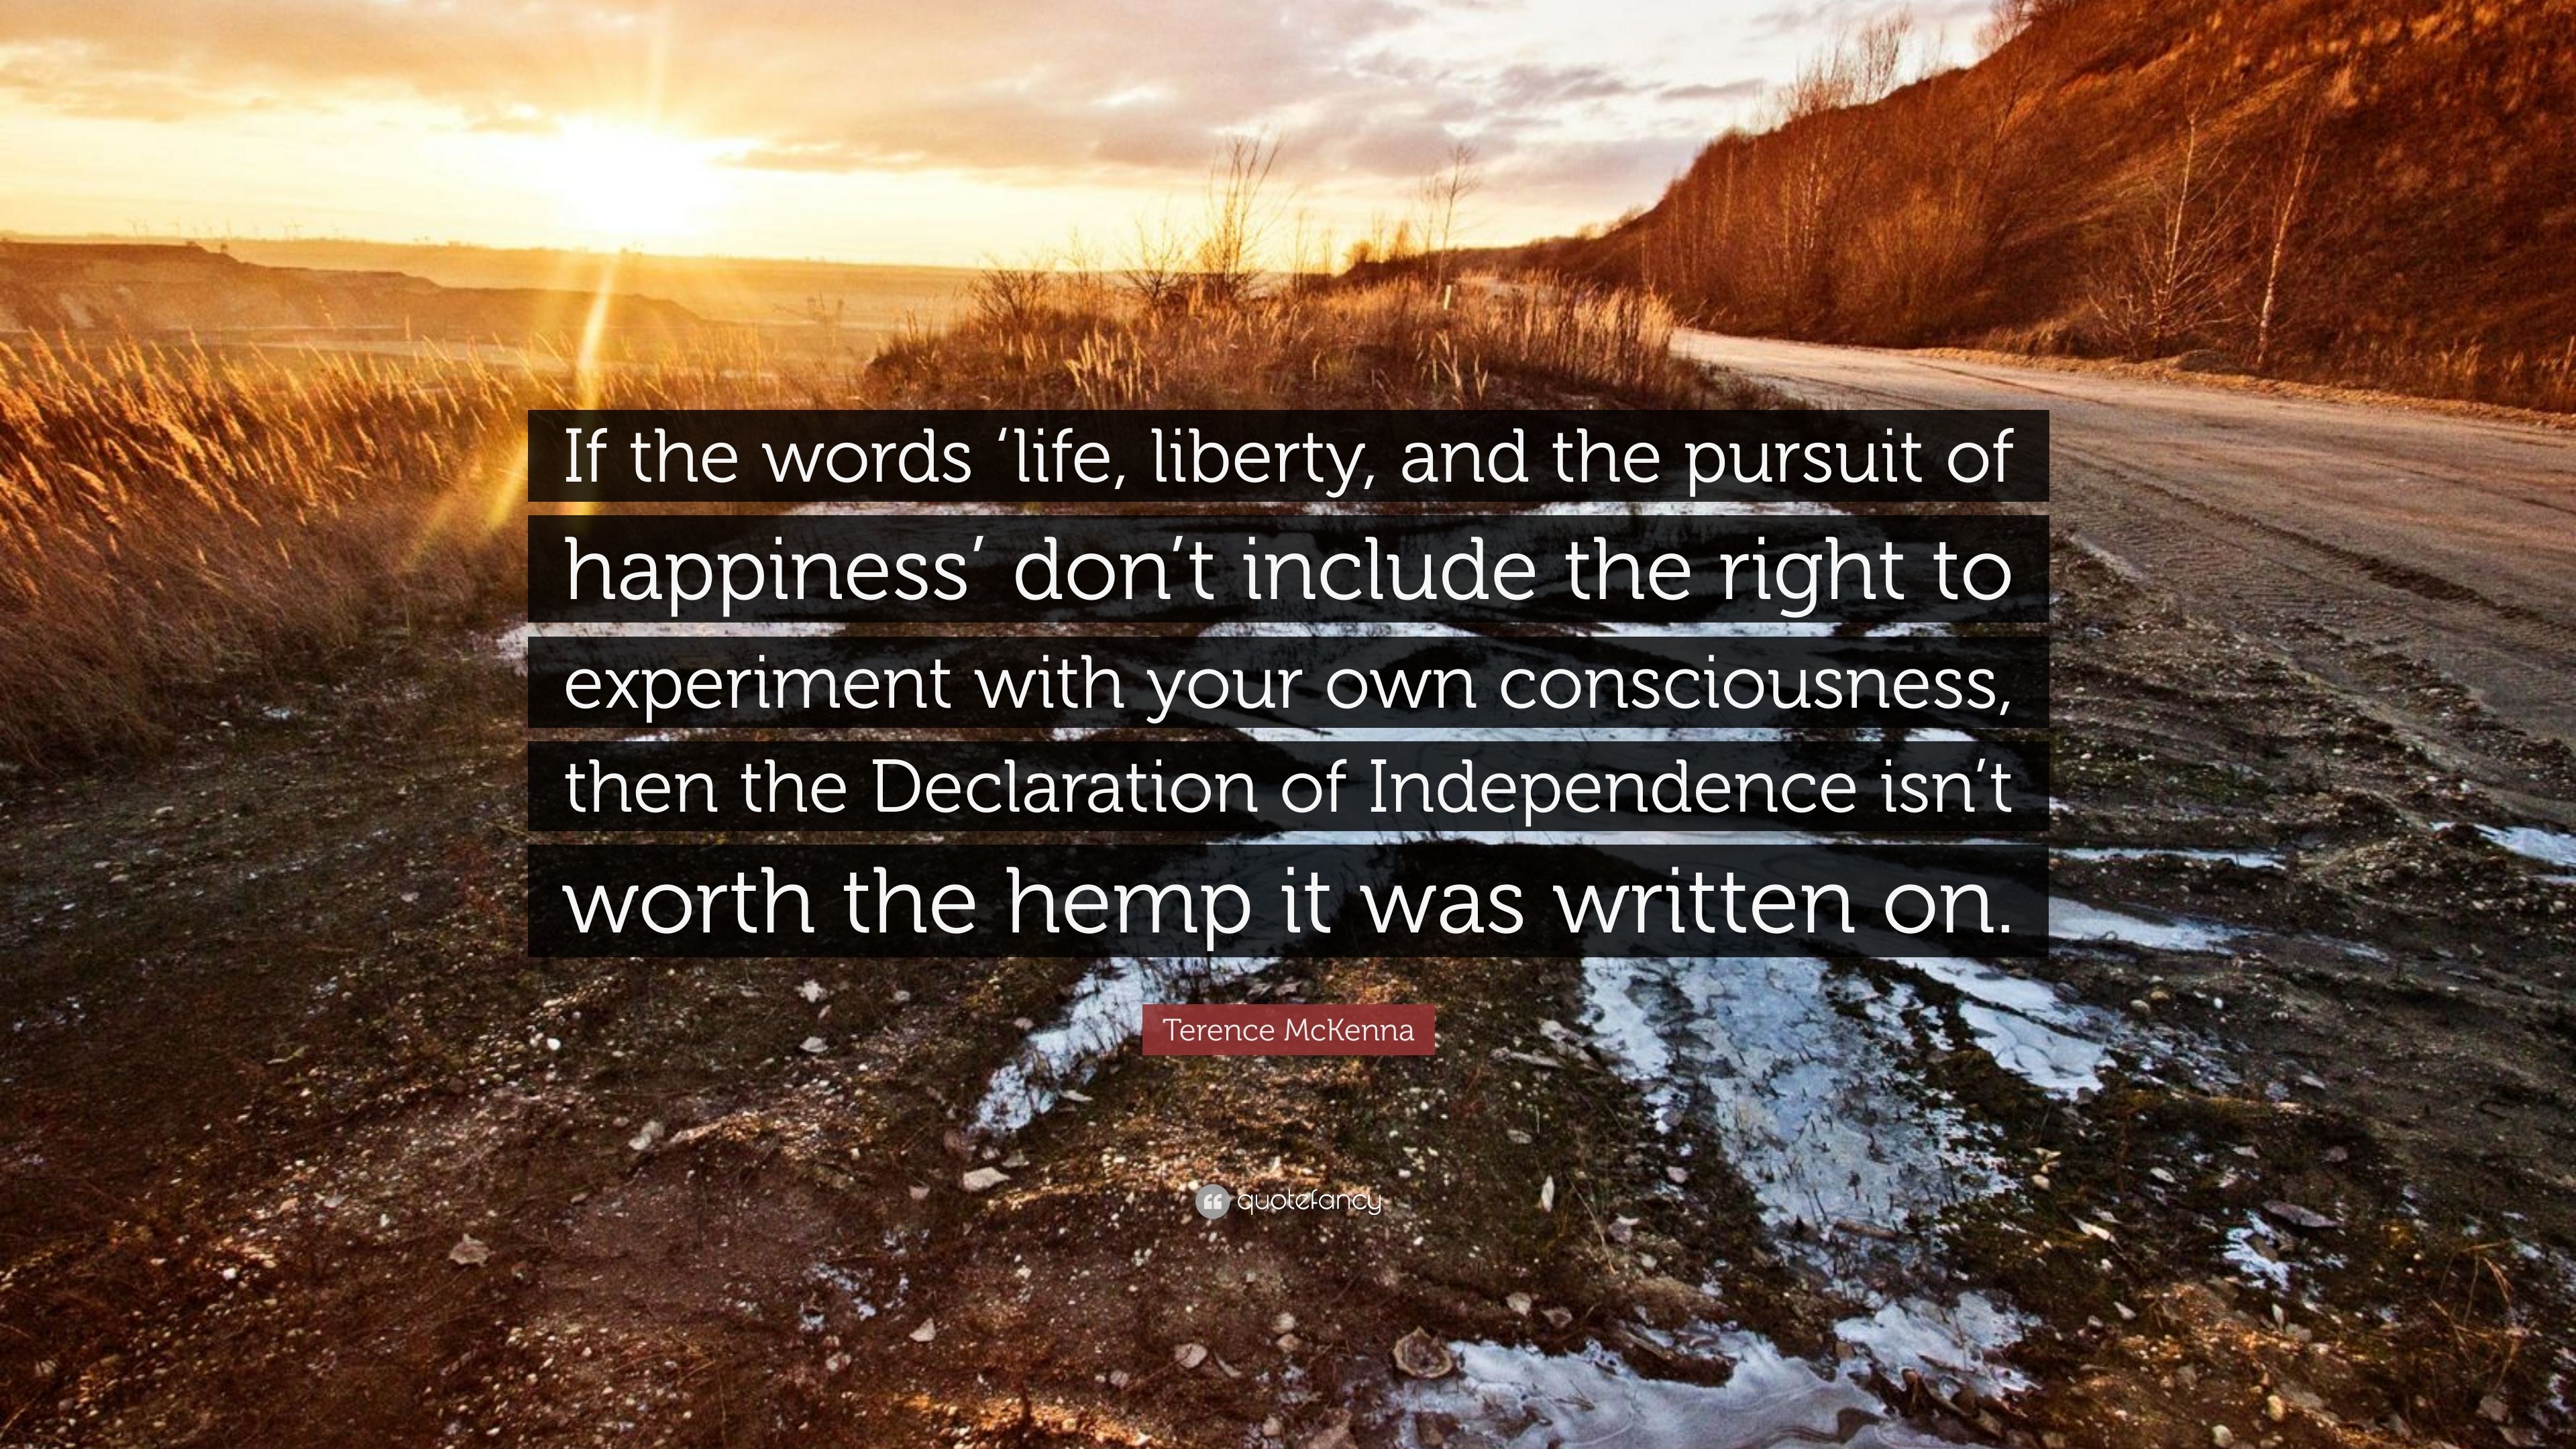 Terence McKenna Quote: “If the words 'life, liberty, and the pursuit